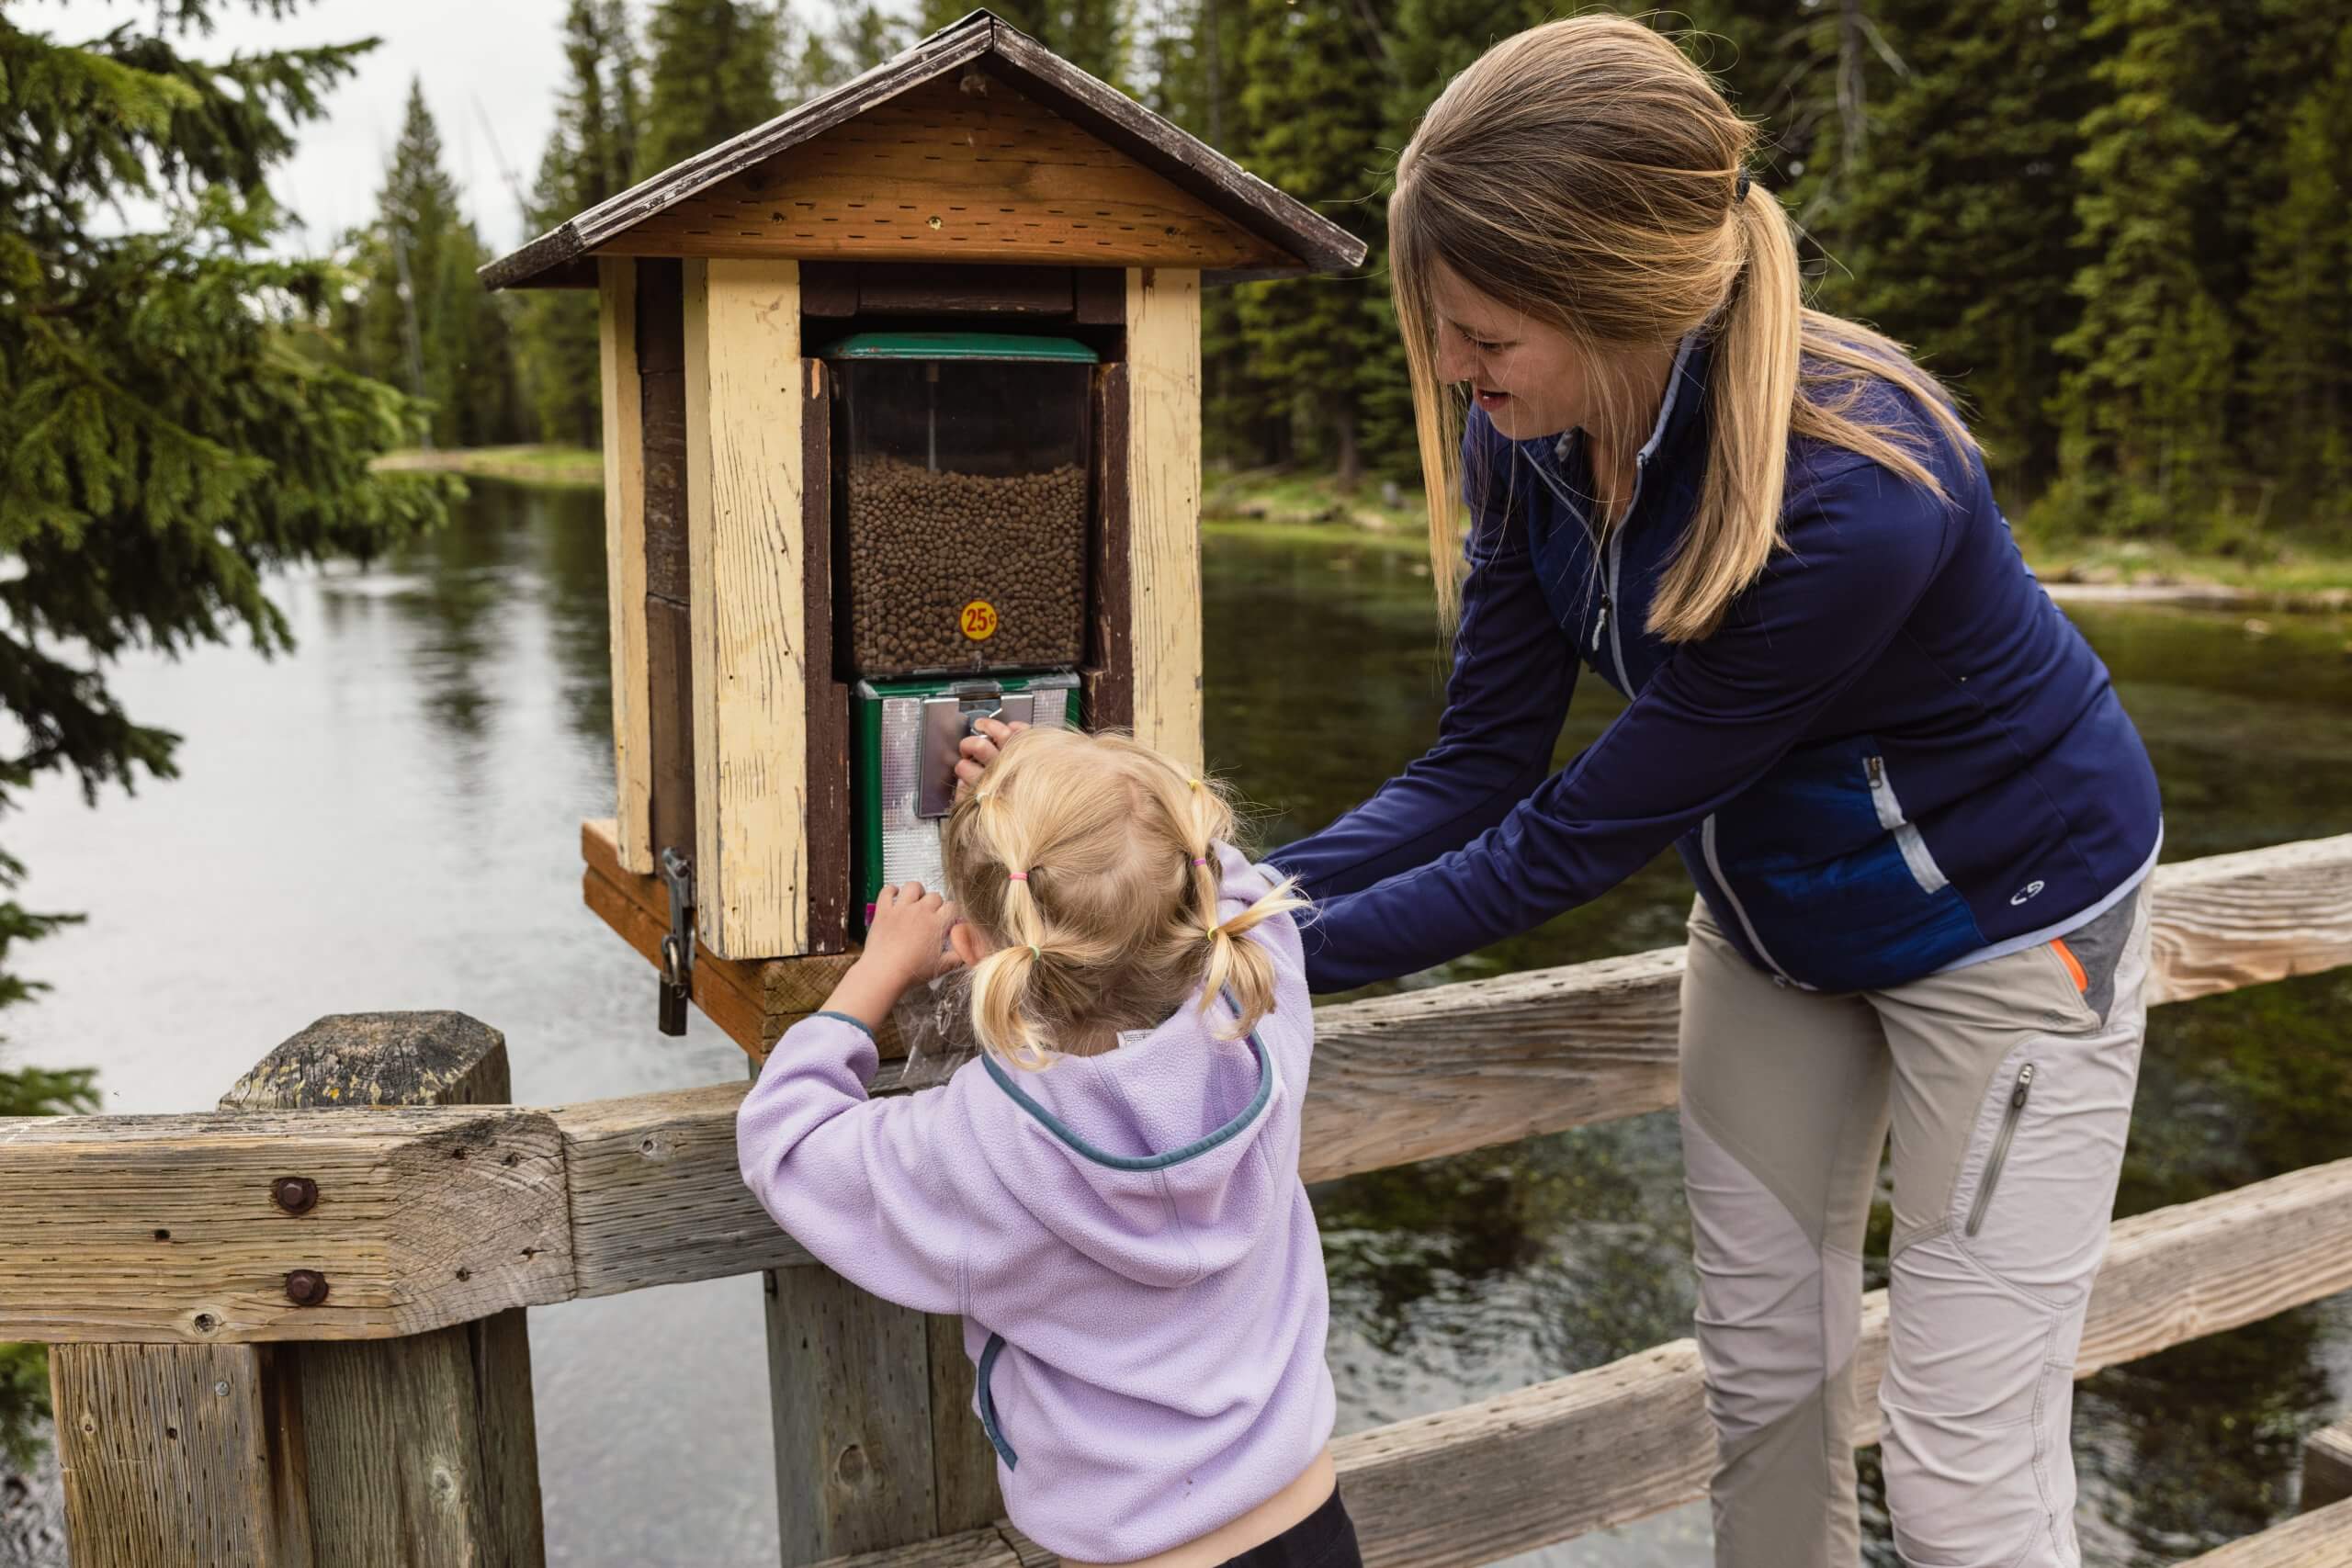 A woman and her daughter buy fish food from a dispenser at Big Springs.